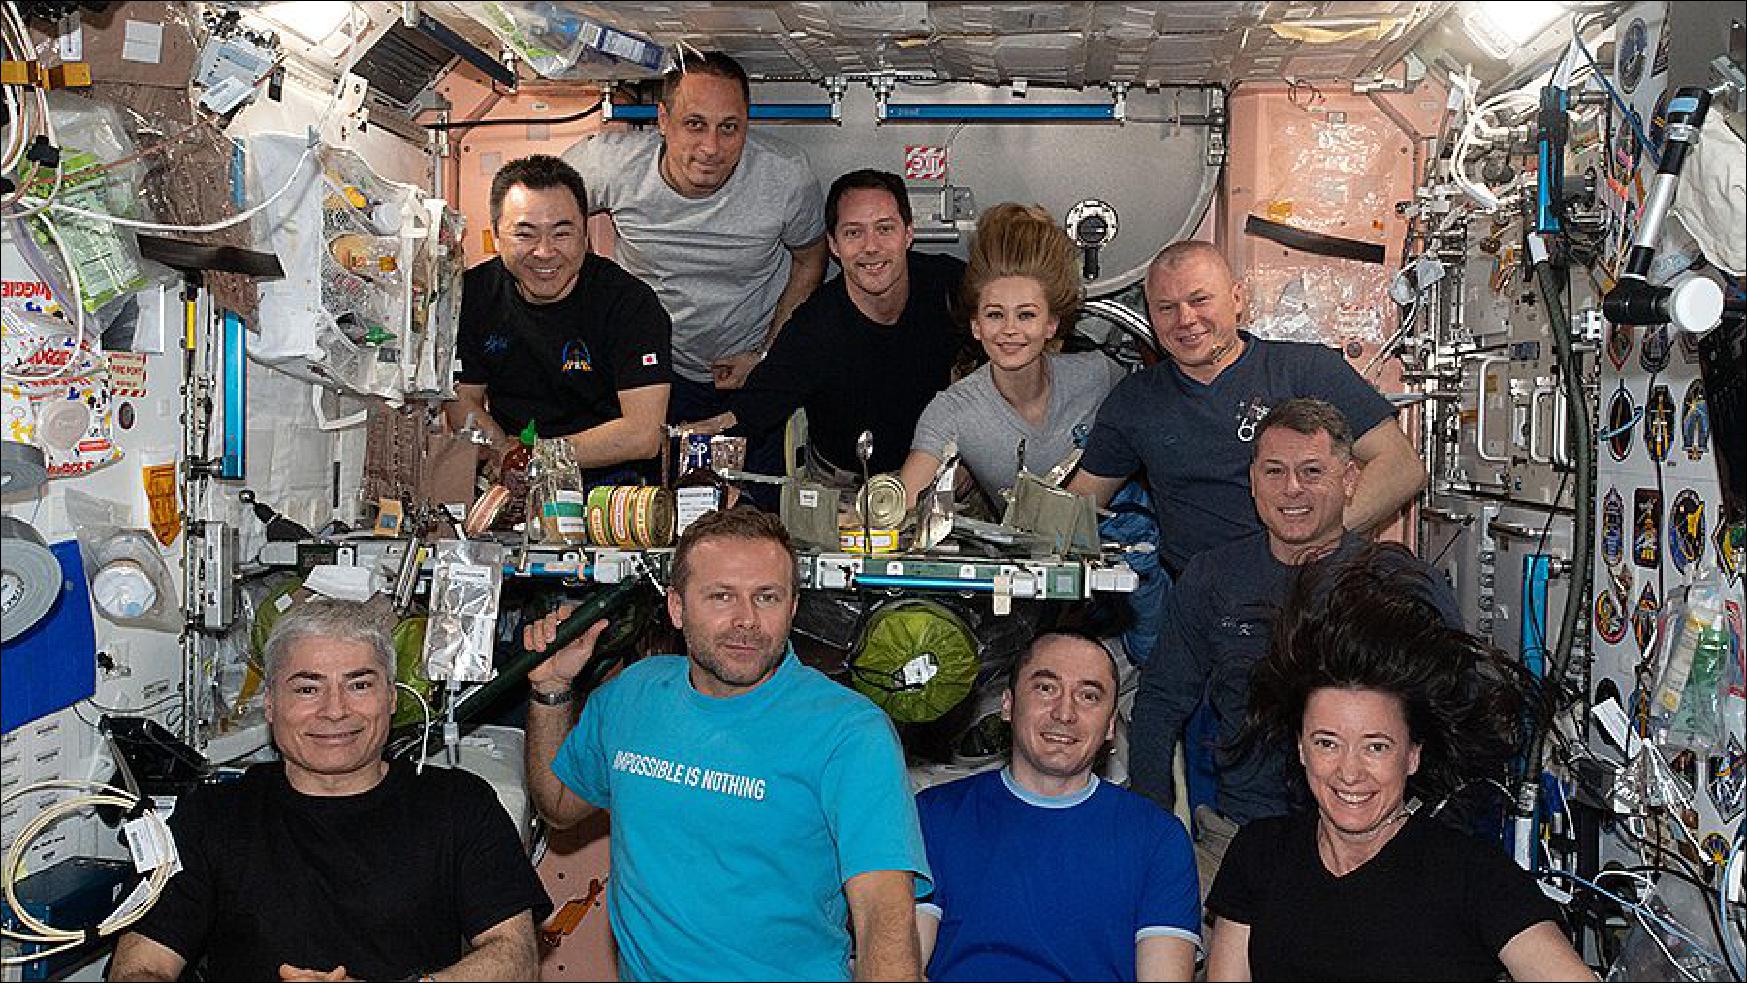 Figure 24: The ten station inhabitants are gathered together in the Unity module for a meal and a portrait. In the front row (from left) are, Mark Vande Hei, Klim Shipenko, Pyotr Dubrov, and Megan McArthur. In the back row (from left) are, Akihiko Hoshide, Anton Shkaplerov, Thomas Pesquet, Yulia Peresild, Oleg Novitskiy, and Shane Kimbrough (image credit: NASA)